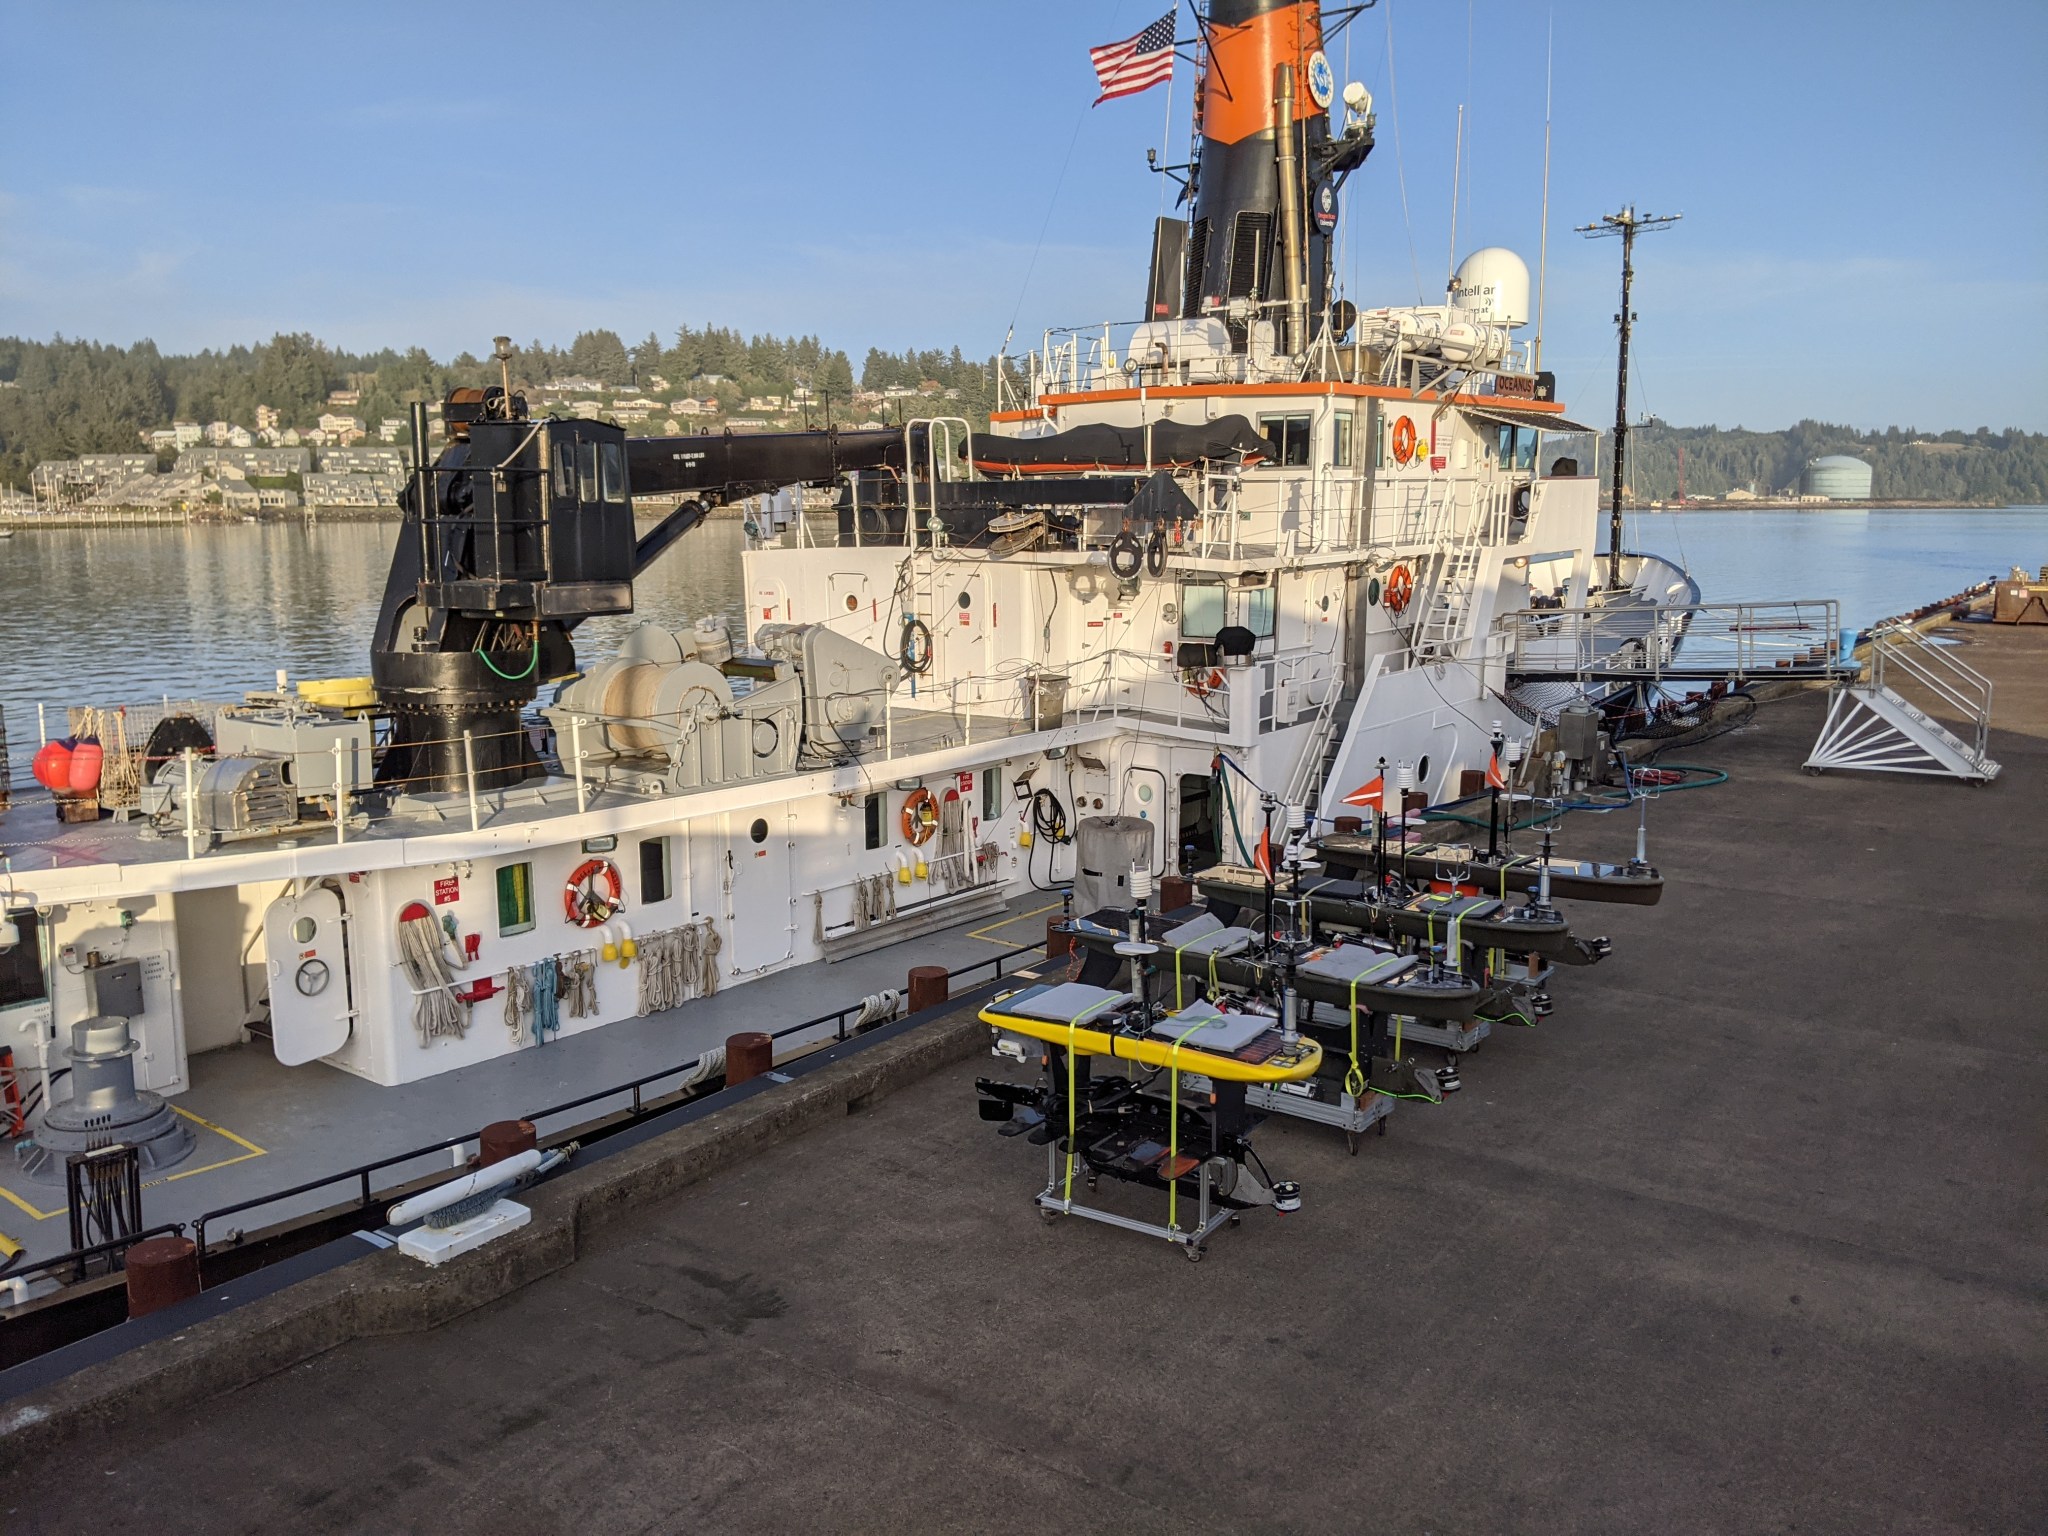 Several autonomous marine robots, including these Wave Gliders from Scripps Institute of Oceanography and the Woods Hole Oceanographic Institute, will deploy from R/V Oceanus ship.